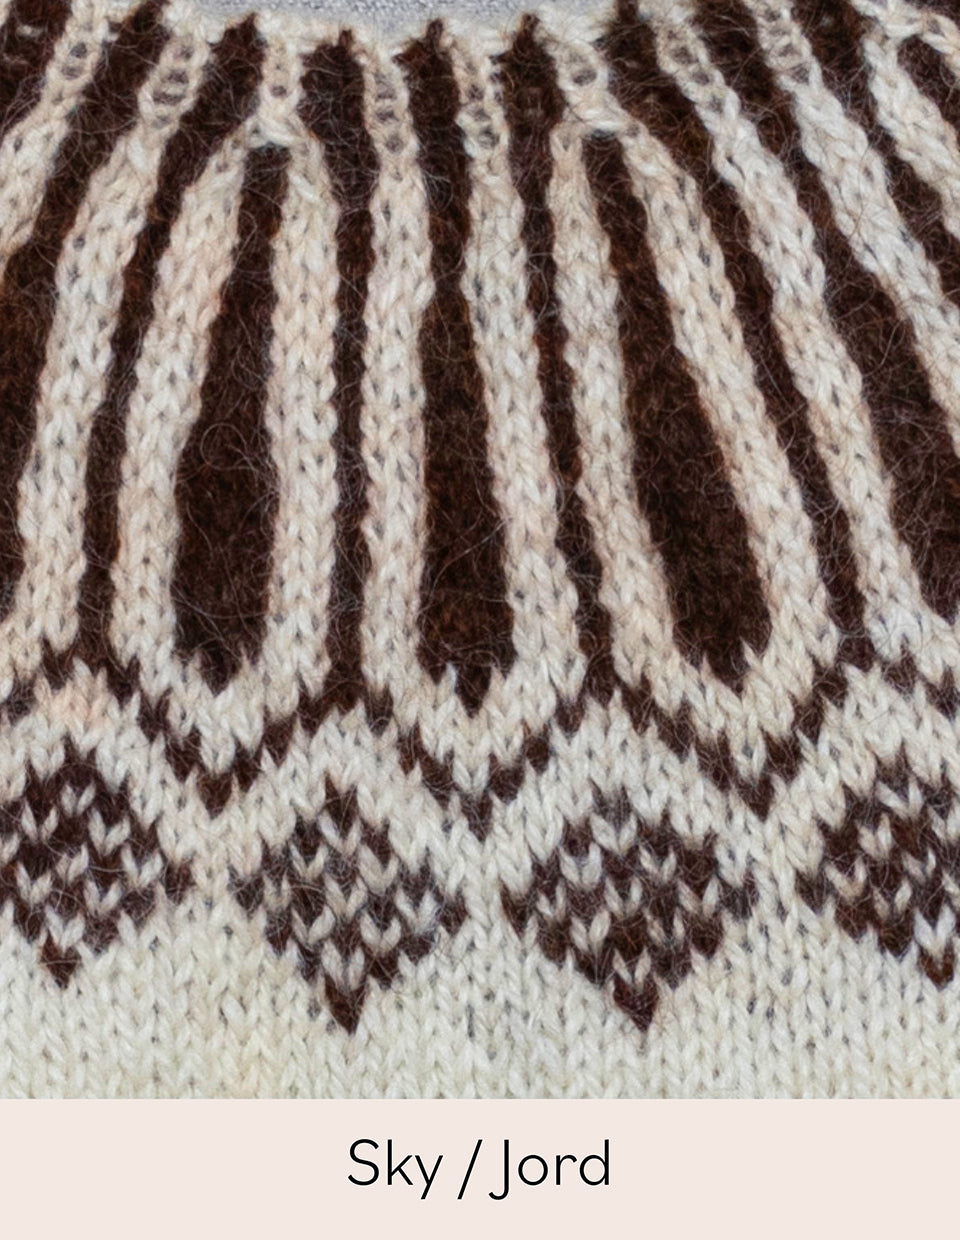 Markus in Sand, hand knitted sweater